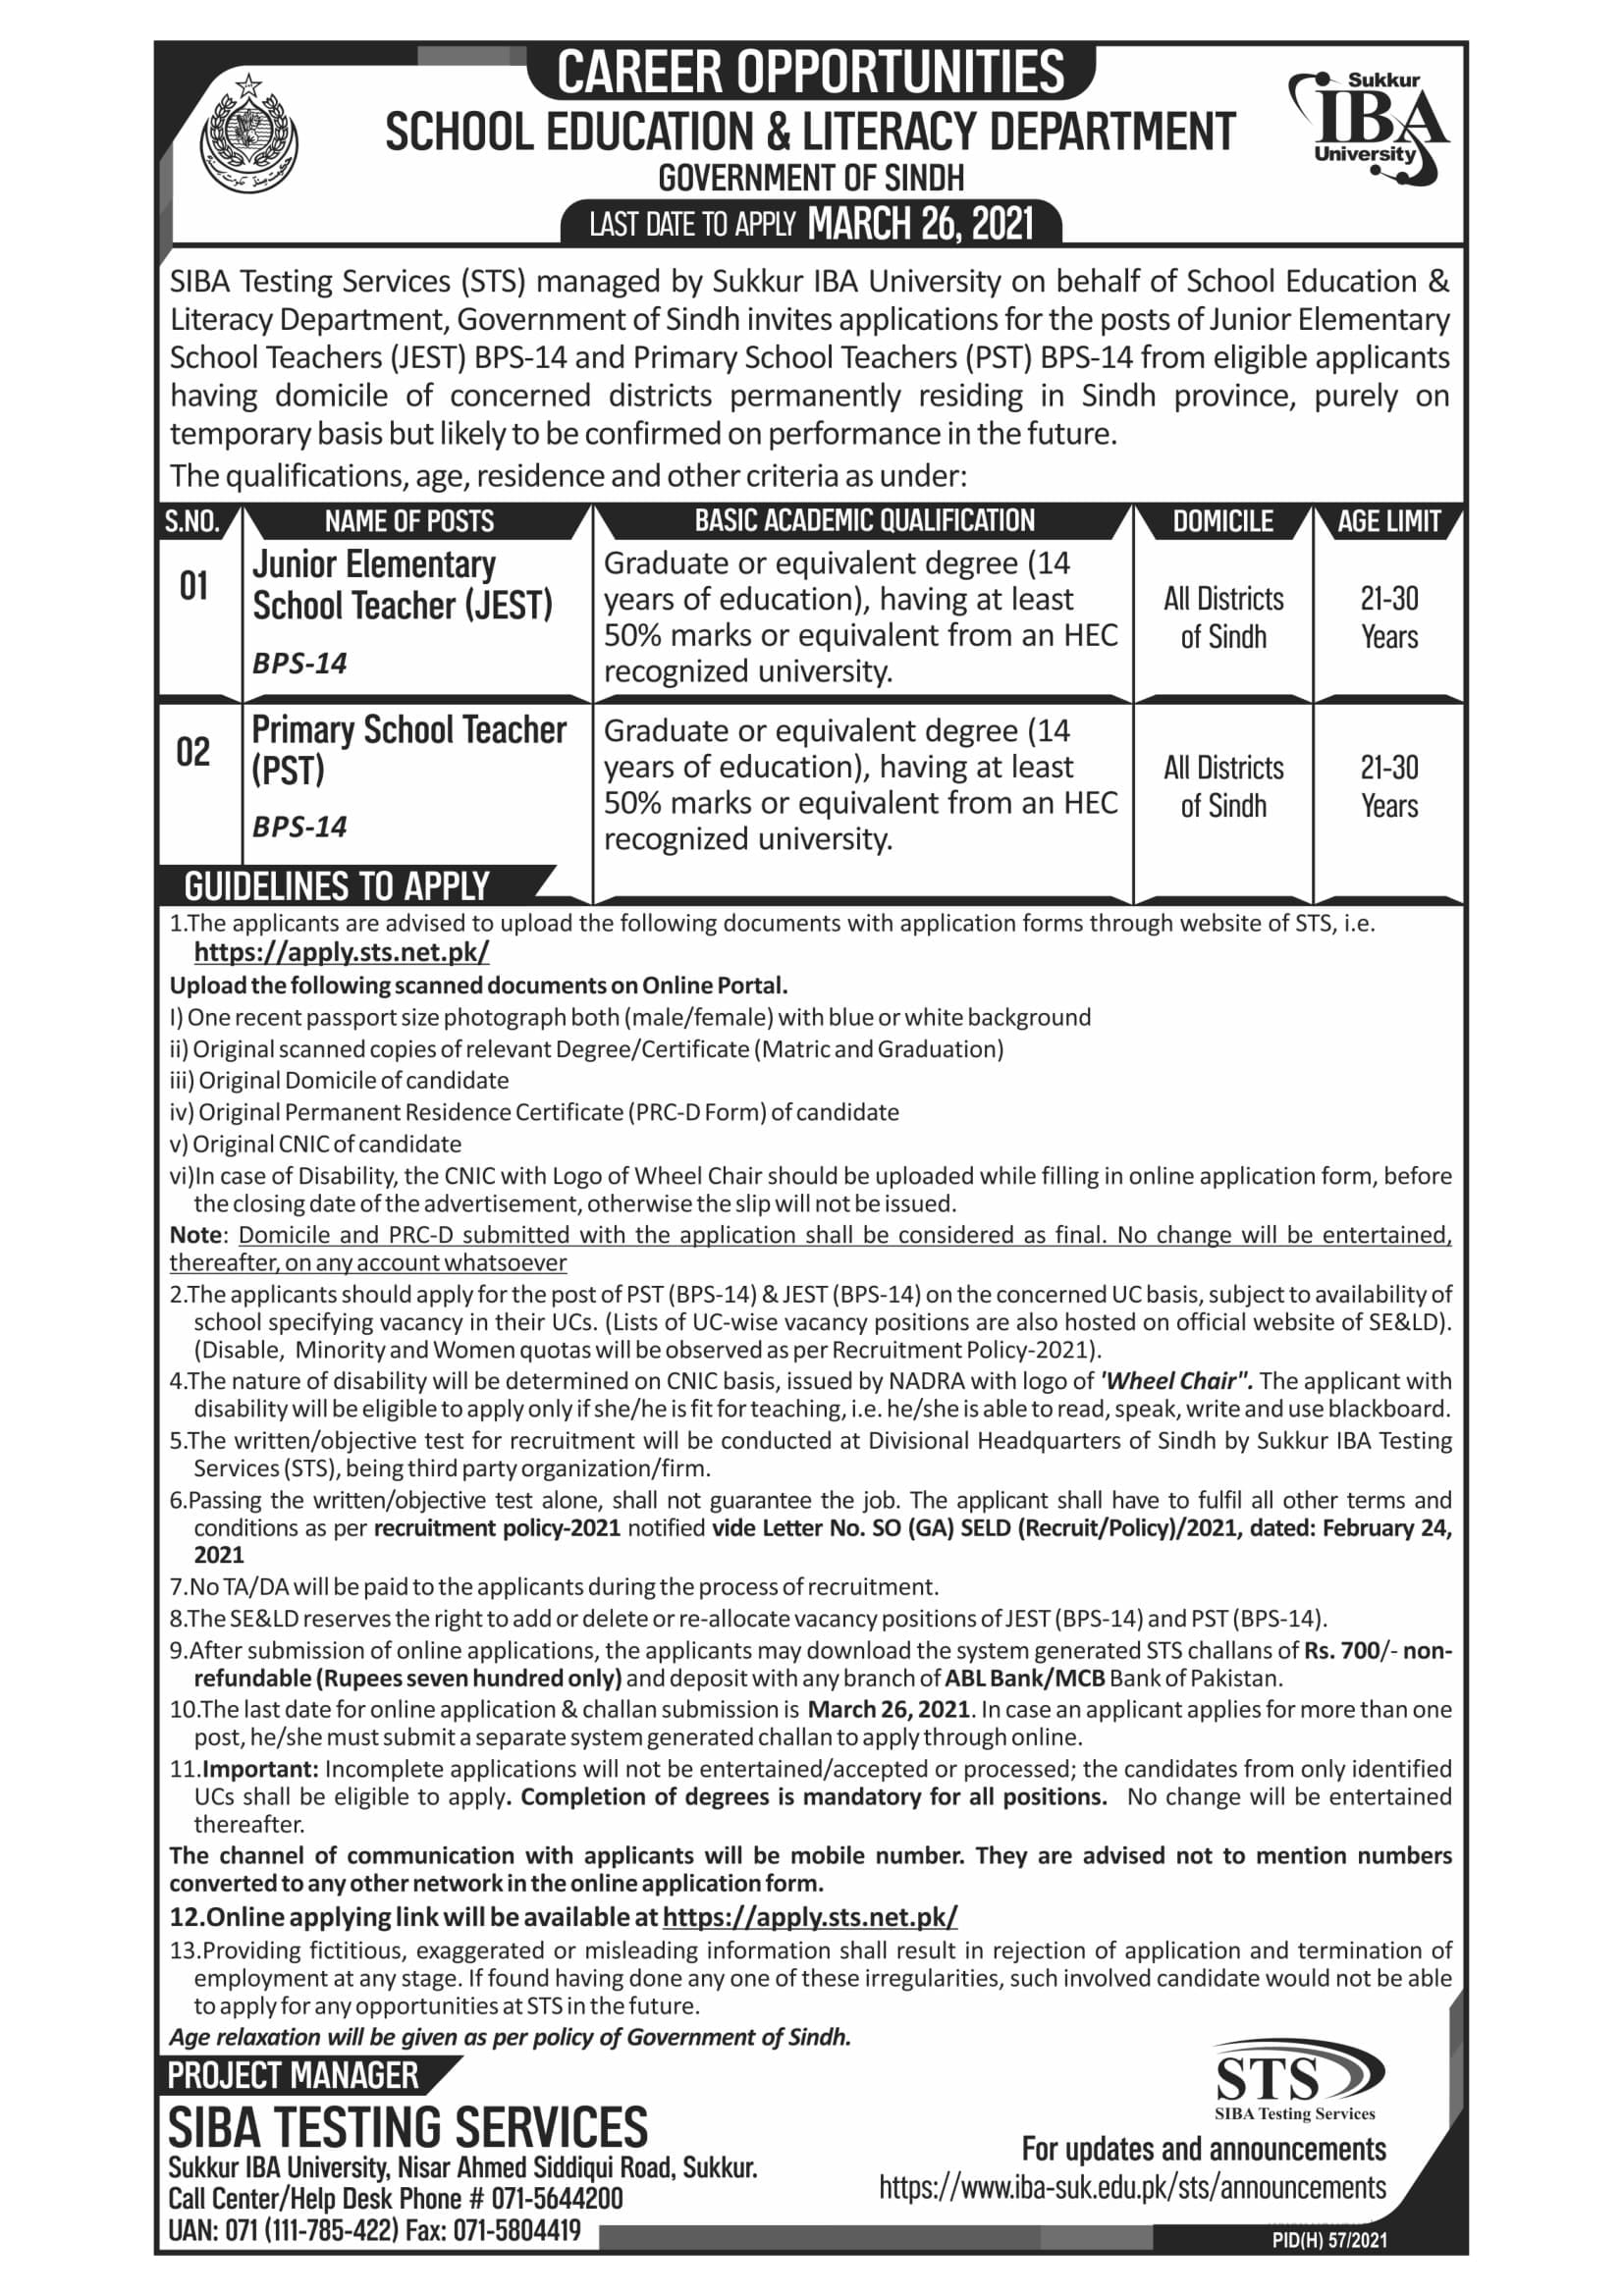 advertisement of jest and pst jobs sindh education department